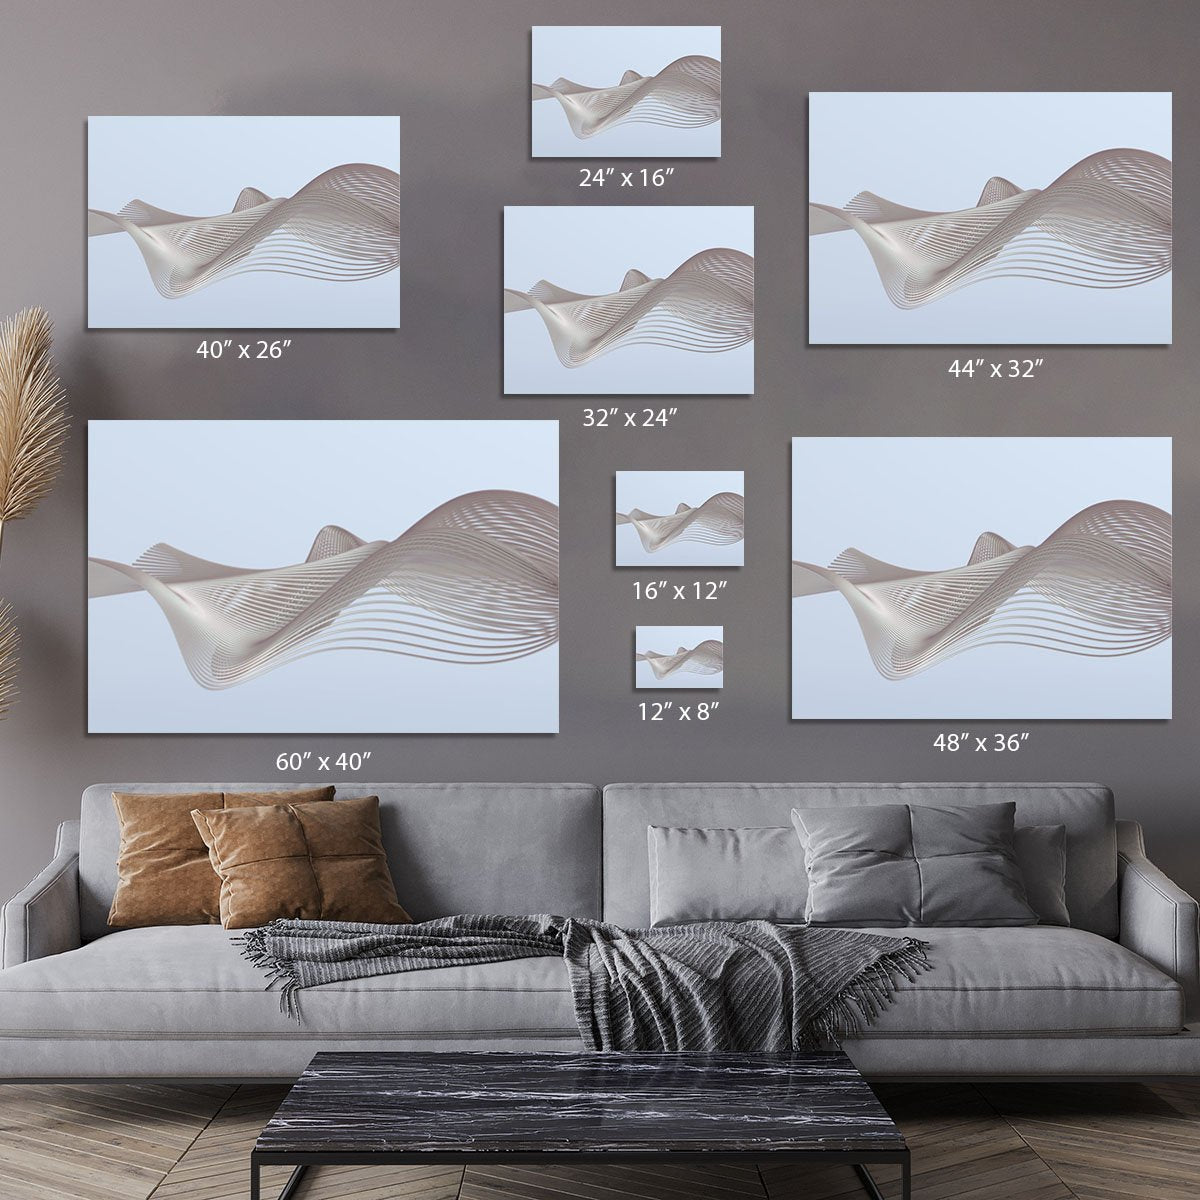 Smooth Lines Canvas Print or Poster